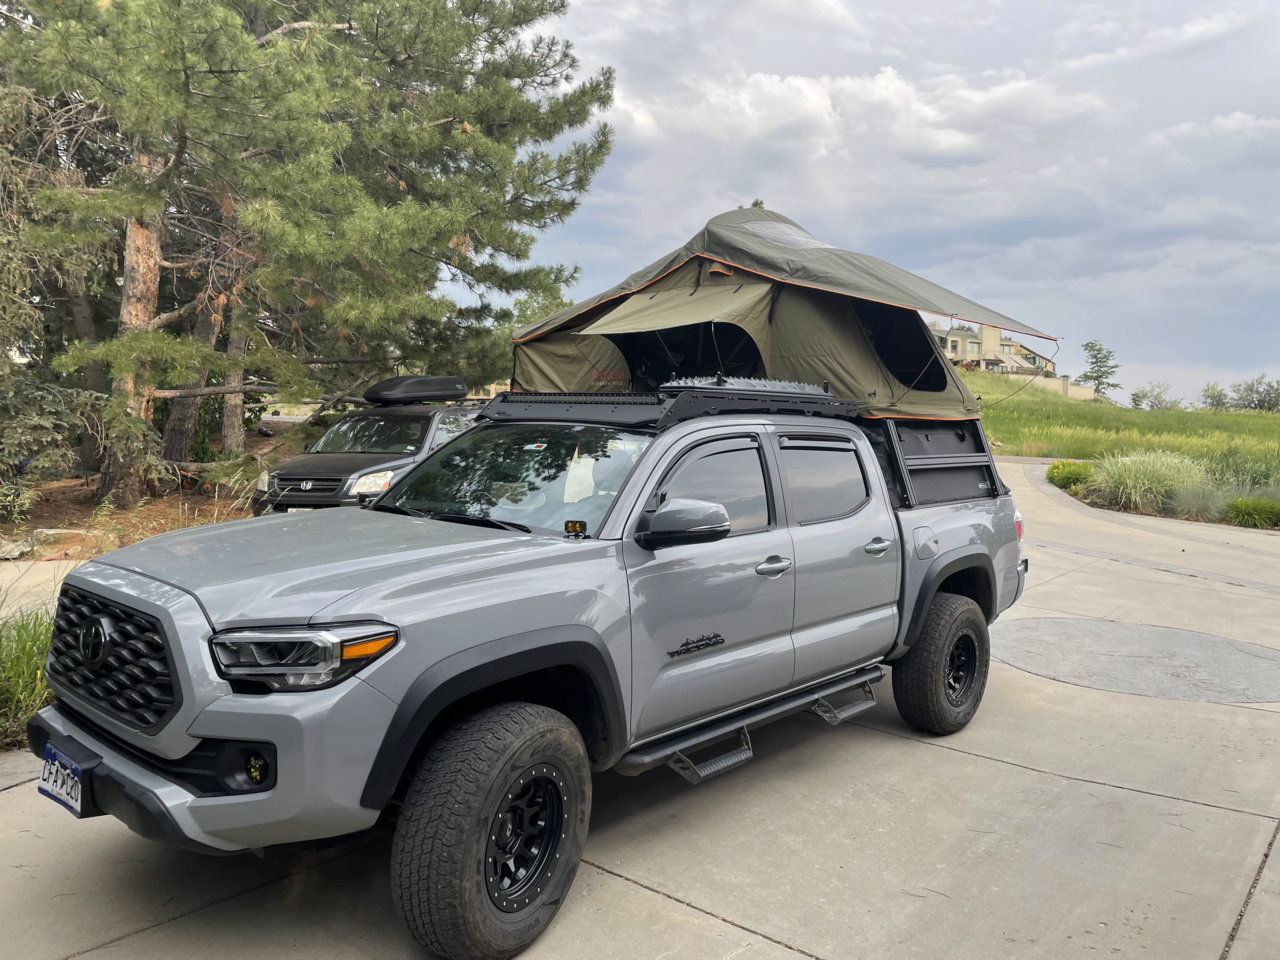 Rod vault and roof top tent help